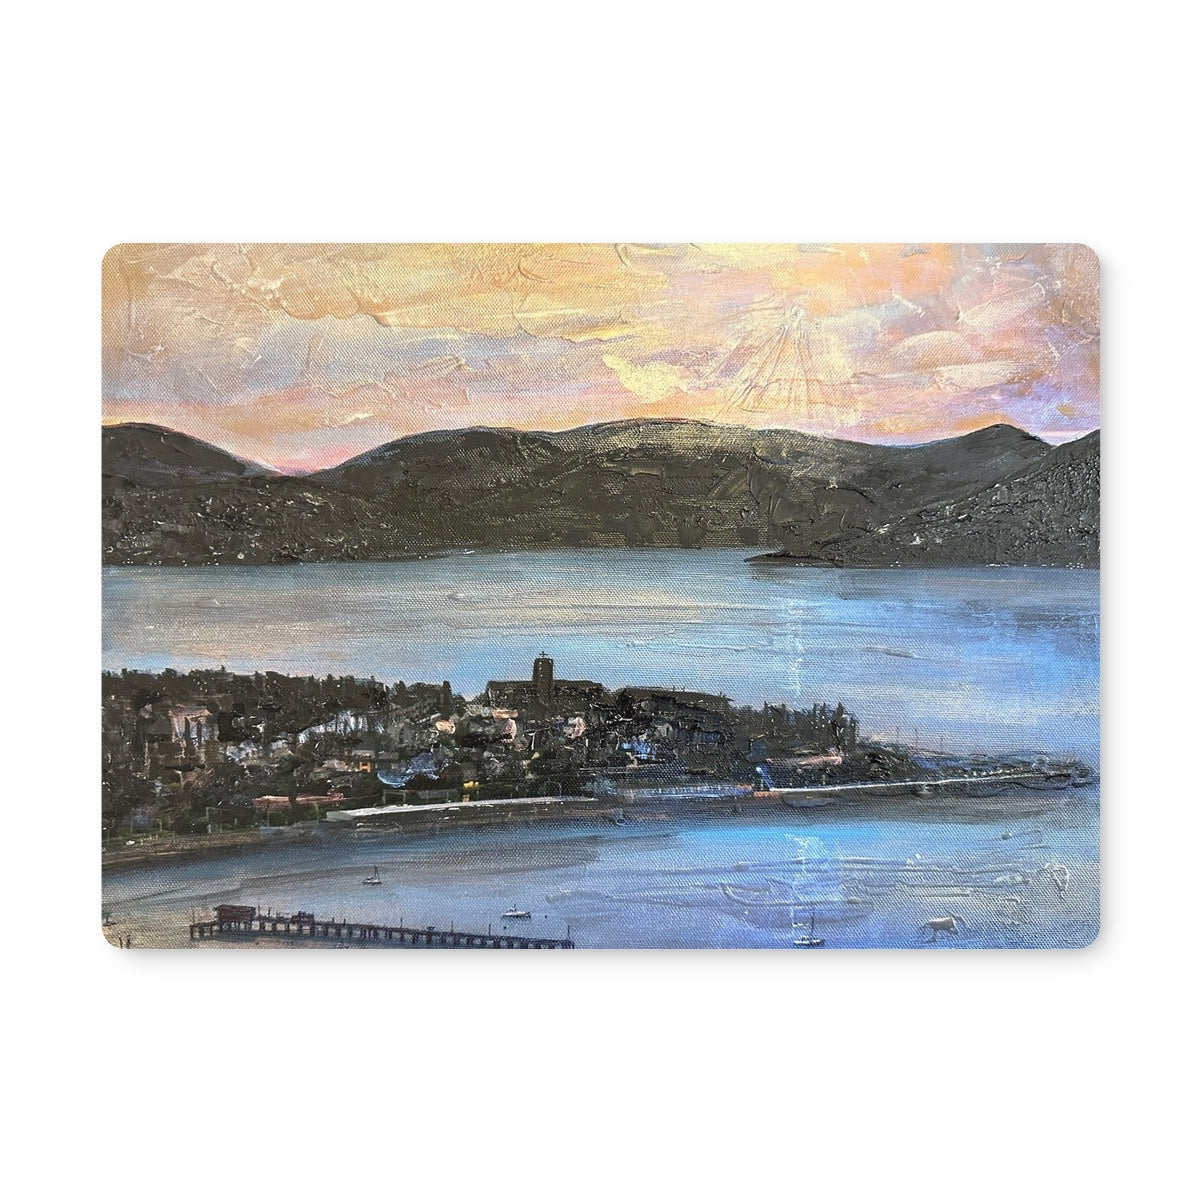 From Lyle Hill Art Gifts Placemat-Placemats-River Clyde Art Gallery-Single Placemat-Paintings, Prints, Homeware, Art Gifts From Scotland By Scottish Artist Kevin Hunter